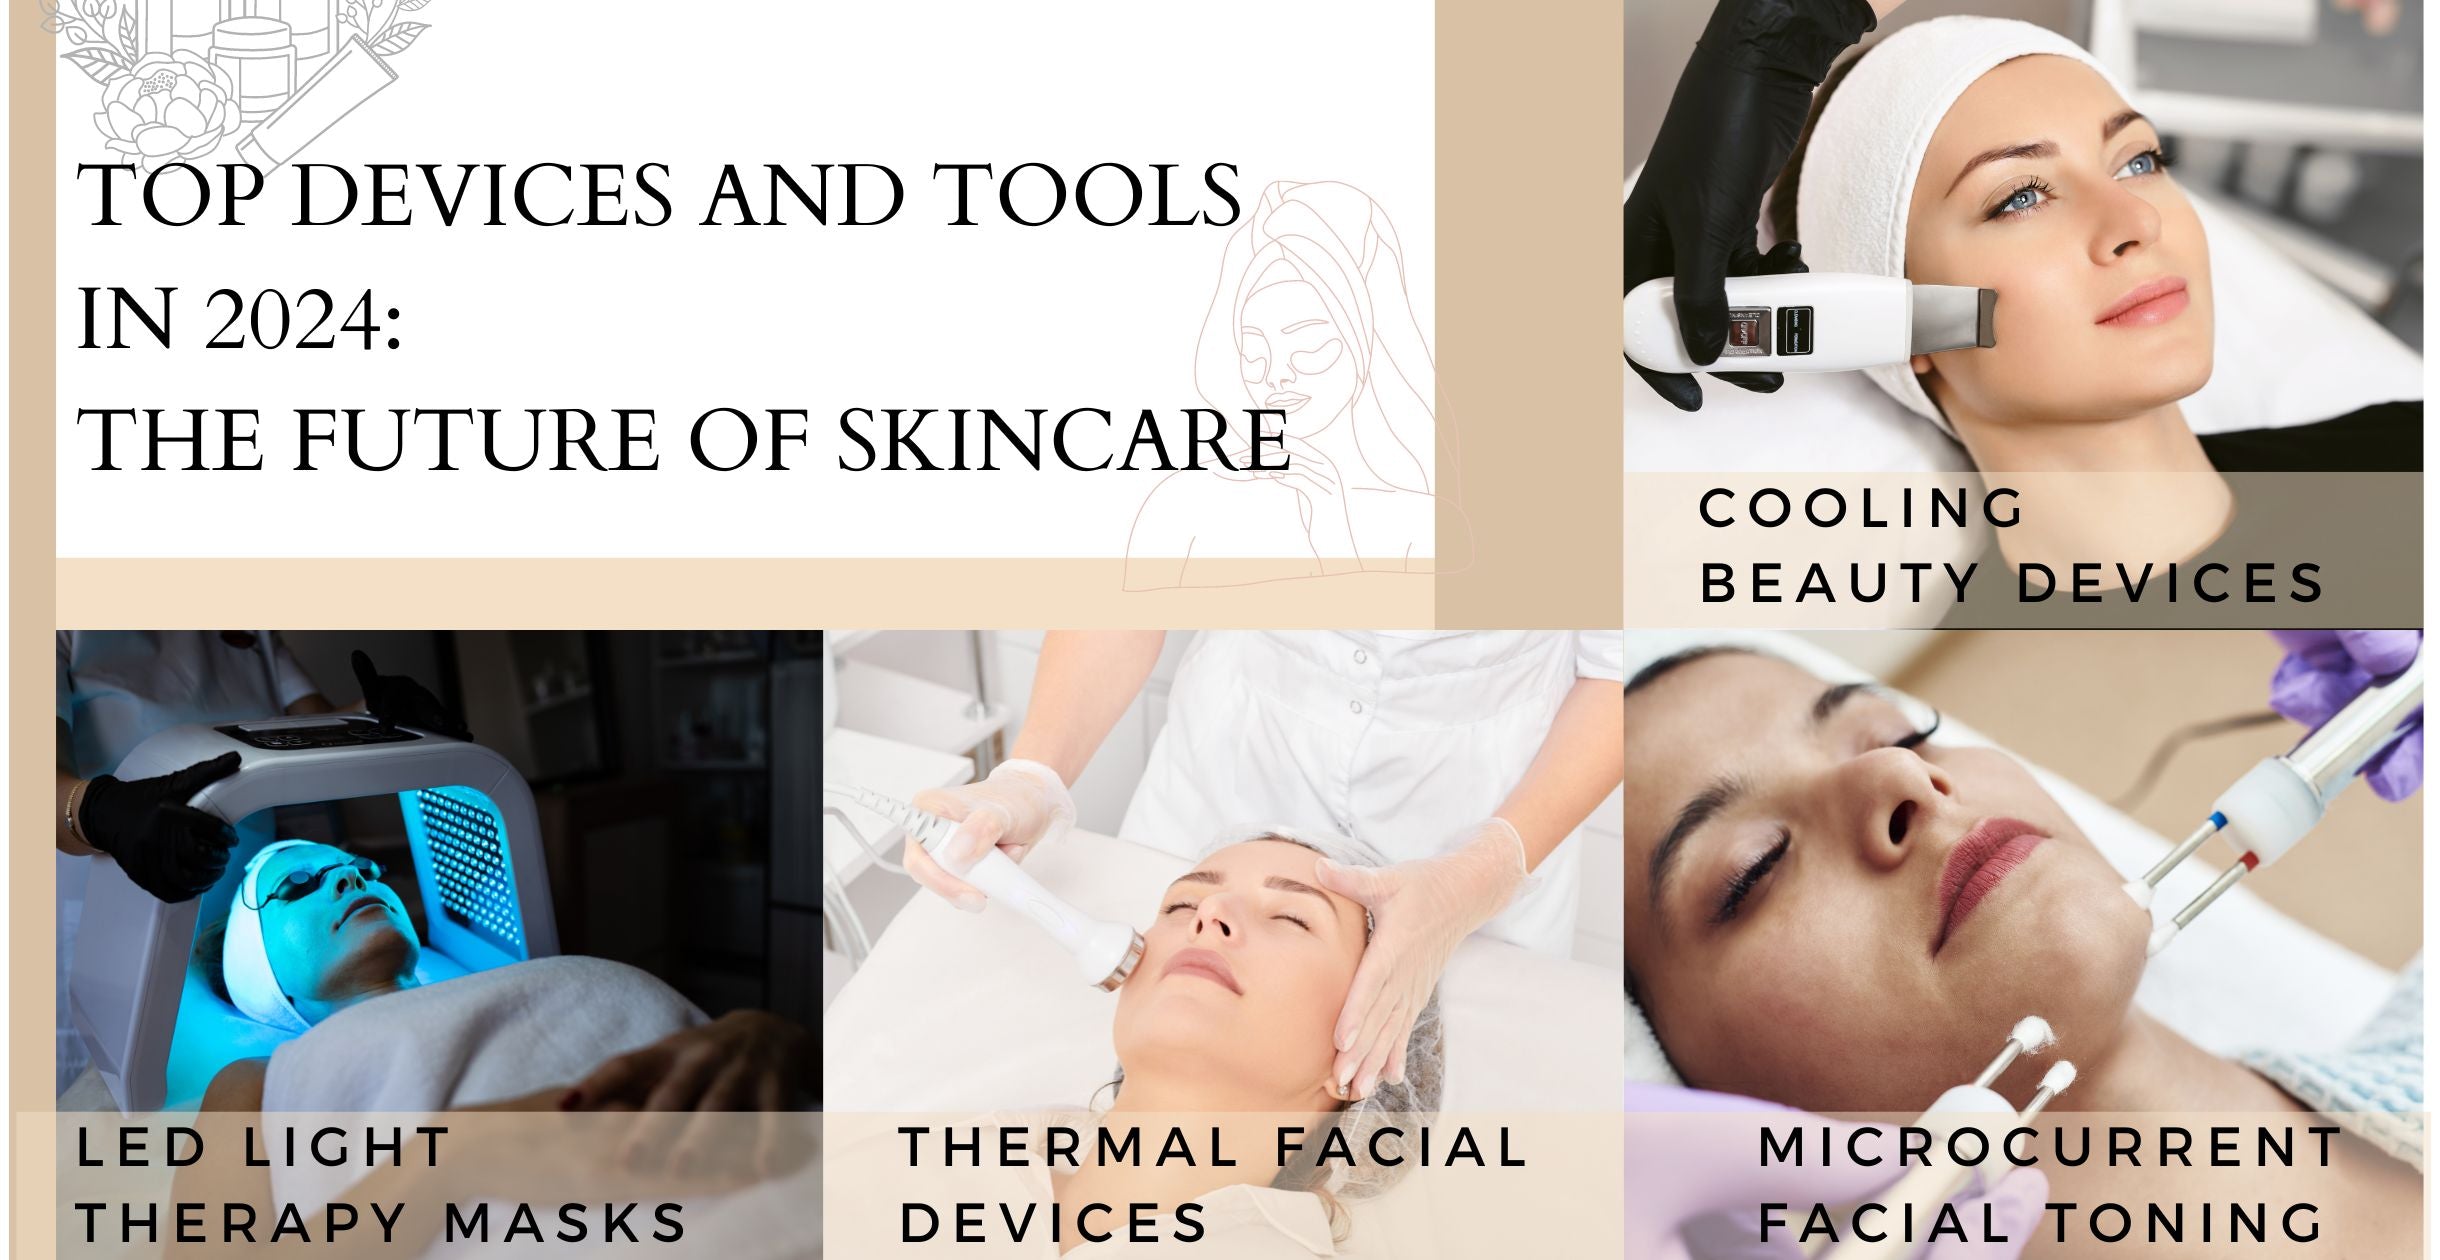 Top Devices and Tools in 2024: The Future of Skincare